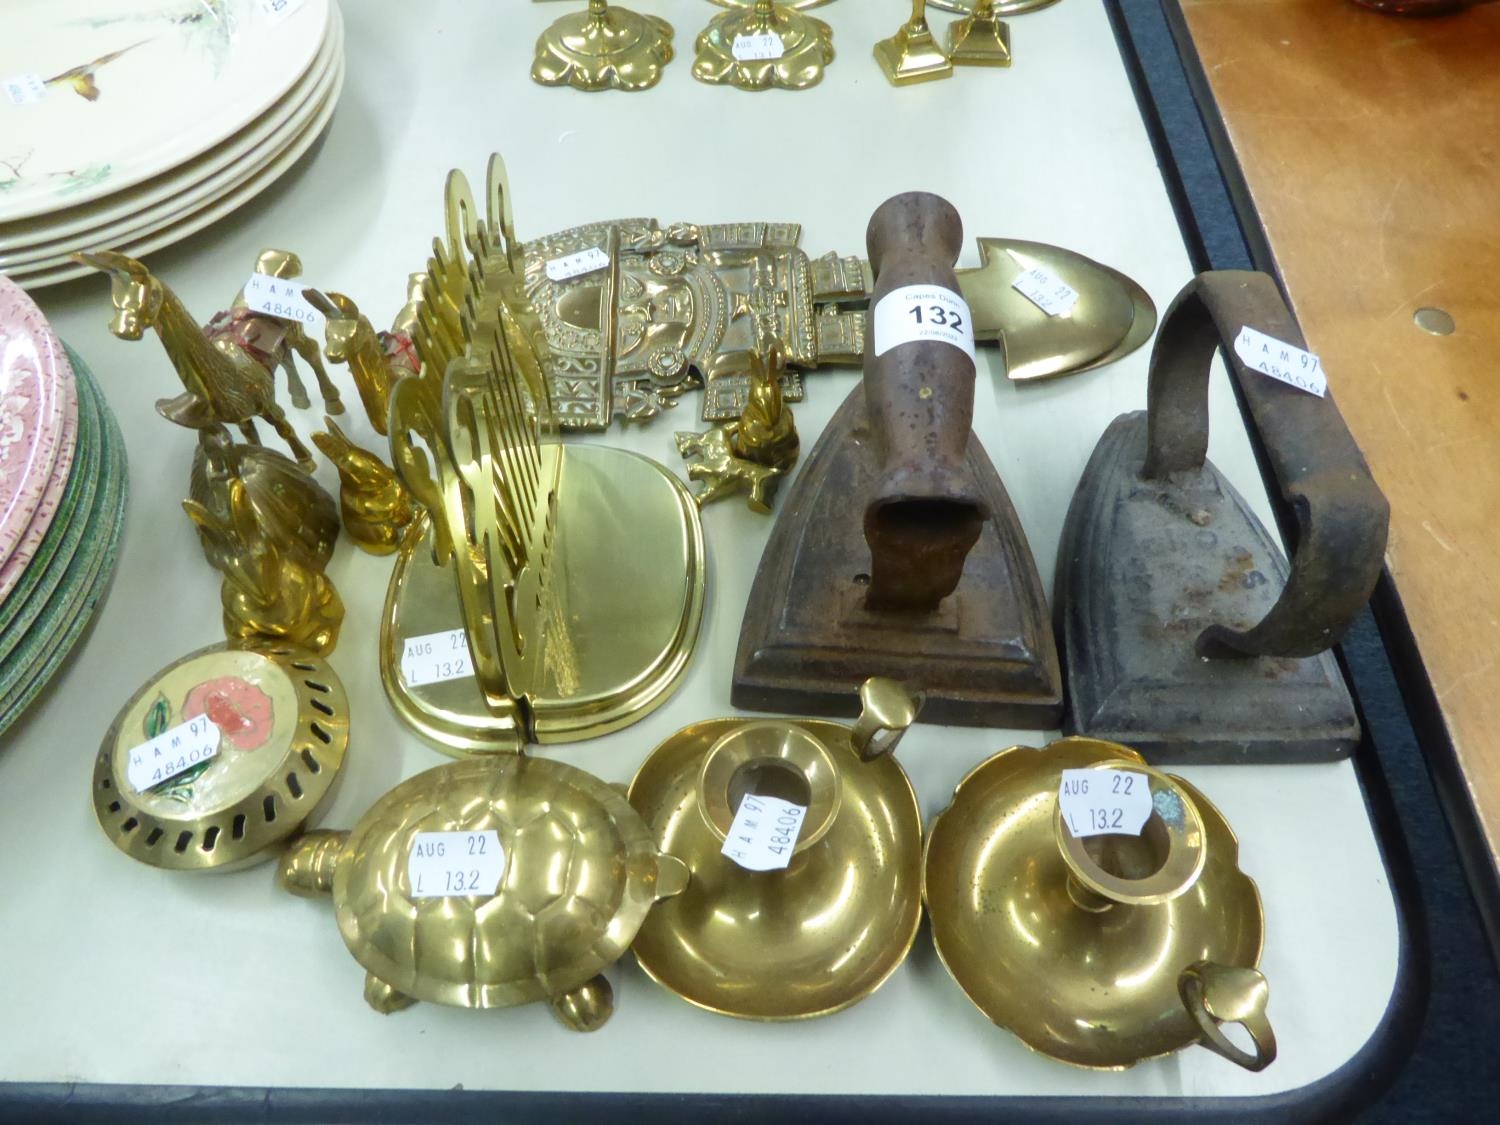 TEN SMALL BRASS ORNAMENTS; TWO CHAMBER CANDLESTICKS, TWO FLAT IRONS, ETC. (APPROXIMATELY 18 PIECES)